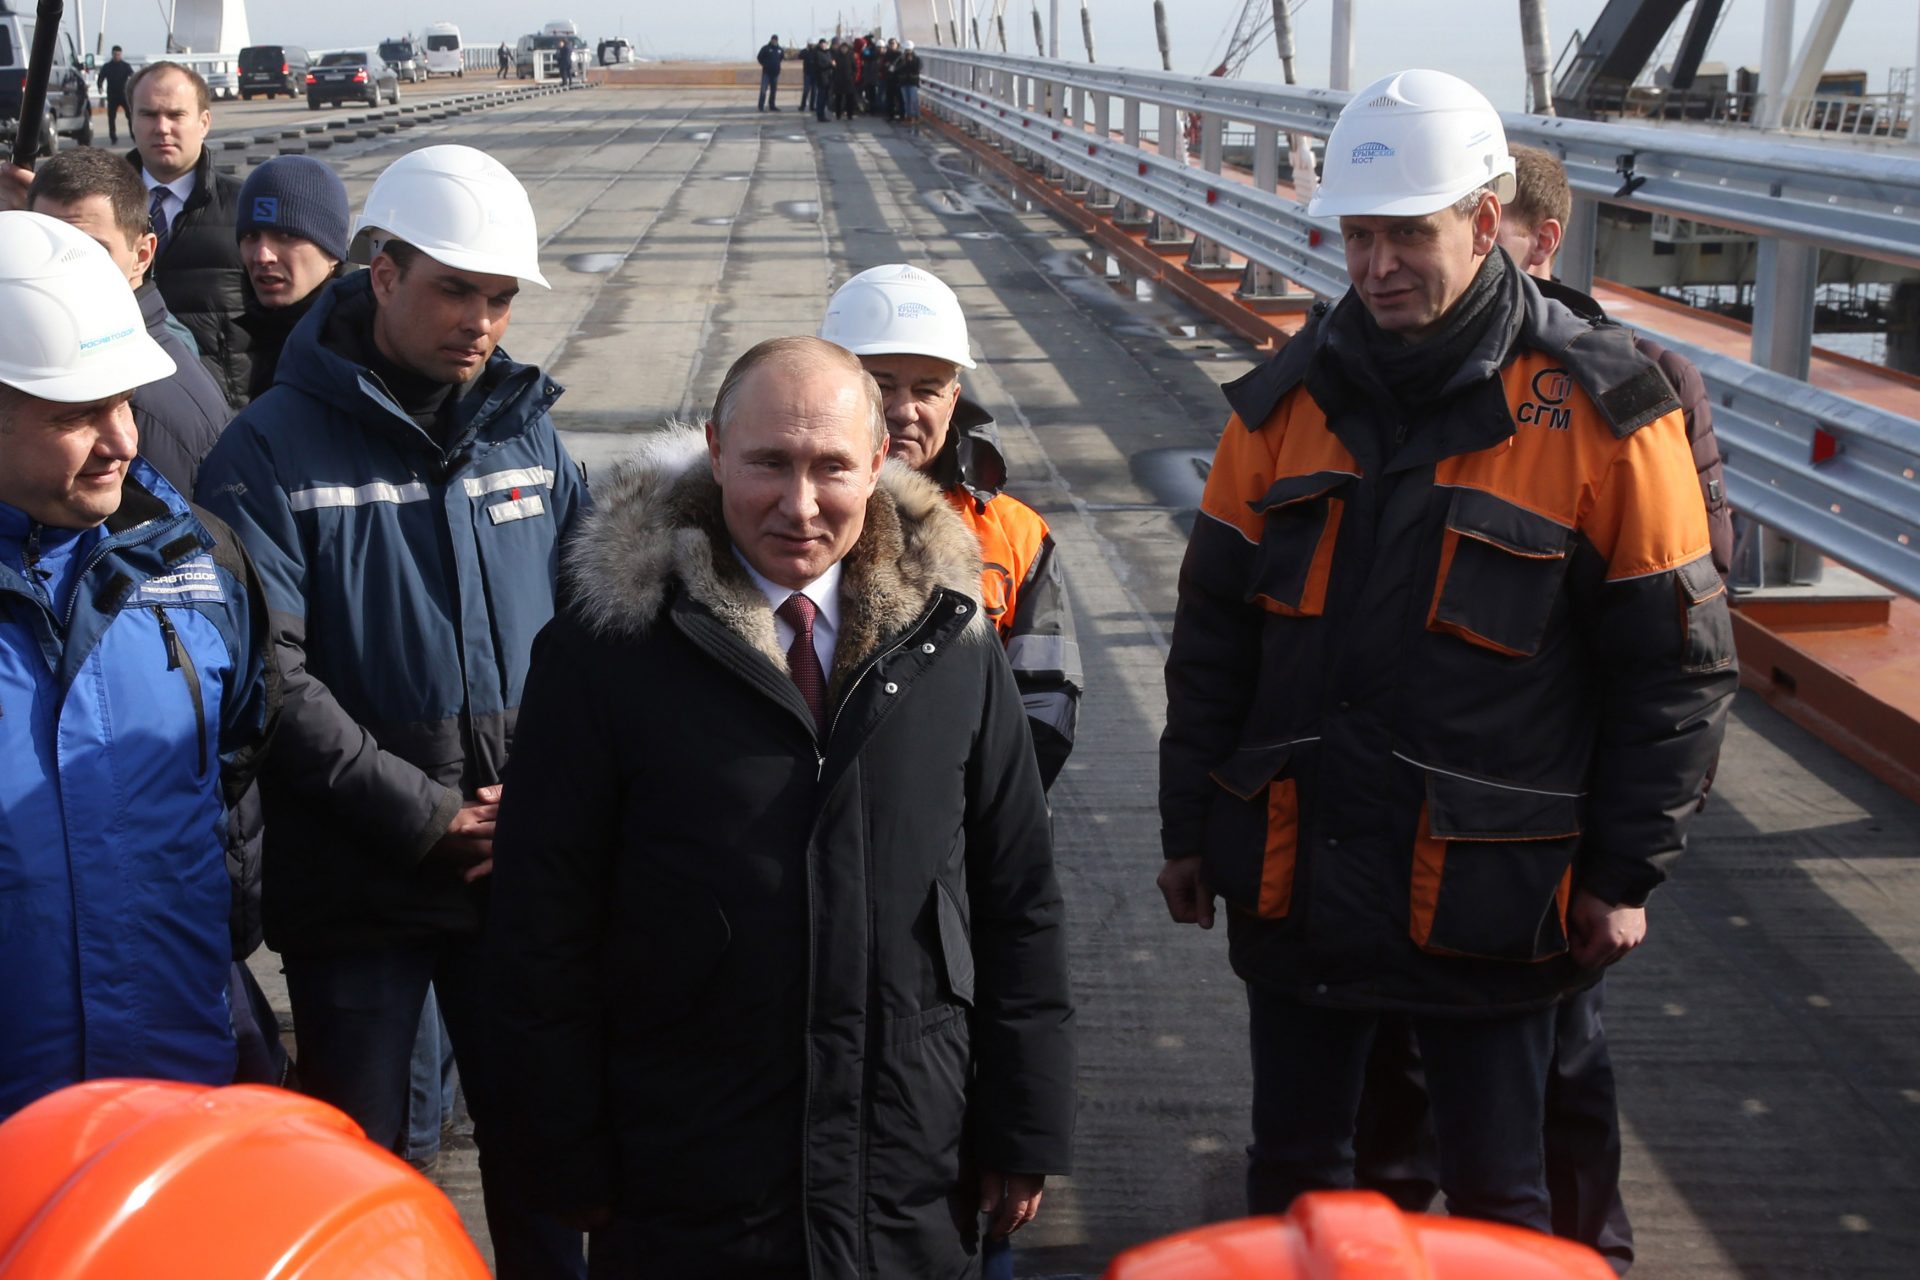 Ukraine wants to destroy the Crimean Bridge but how could they do it?